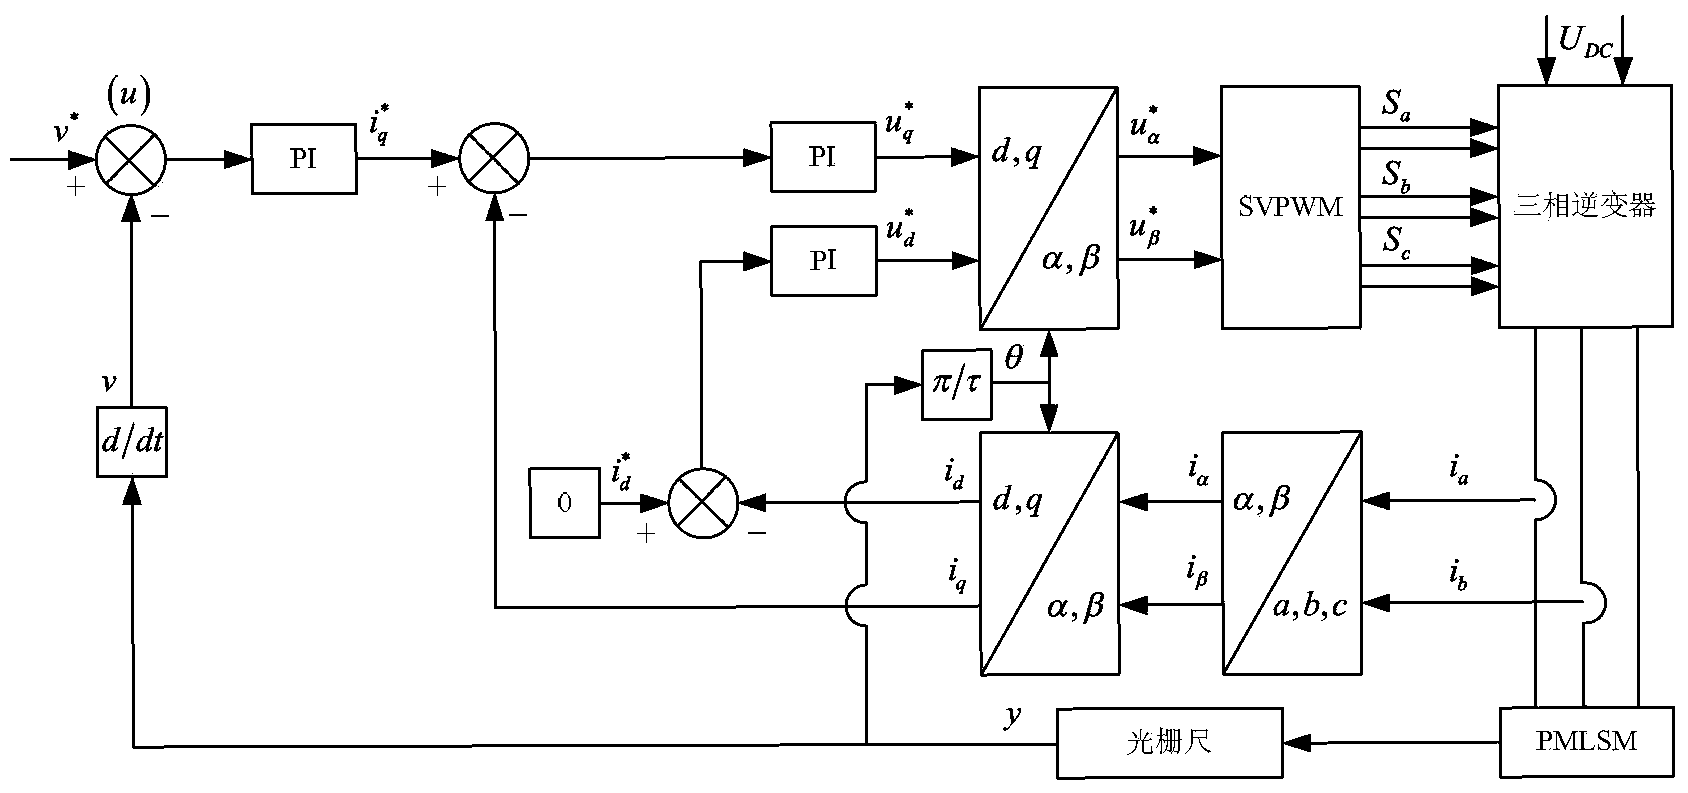 Partially cyclically repetitive controller applied to position servo system